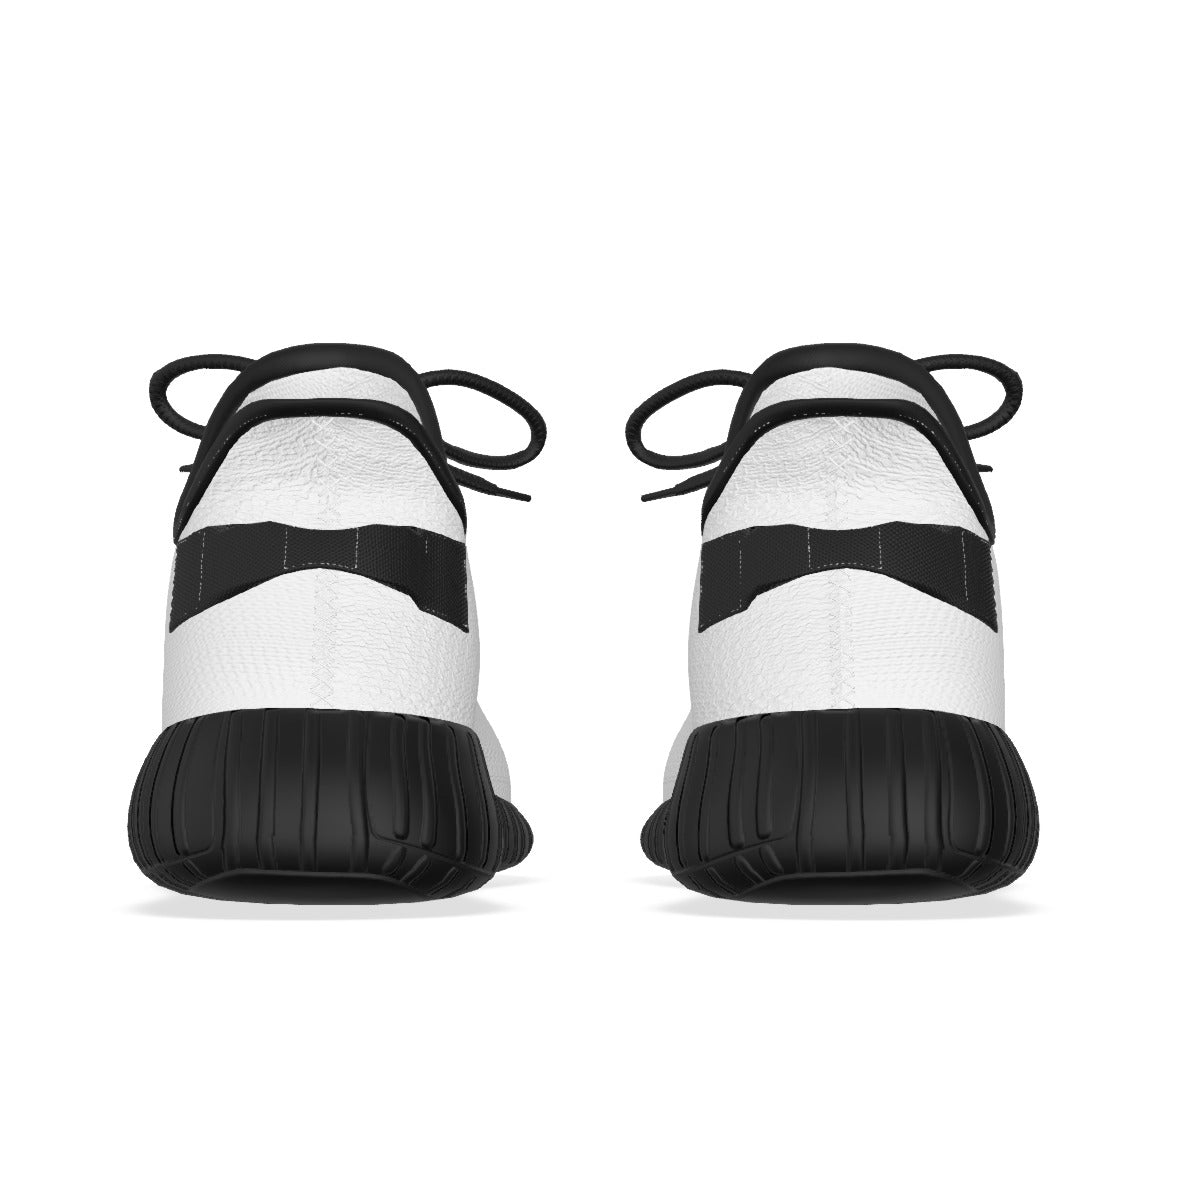 Men's Coconut Shoes Black and White